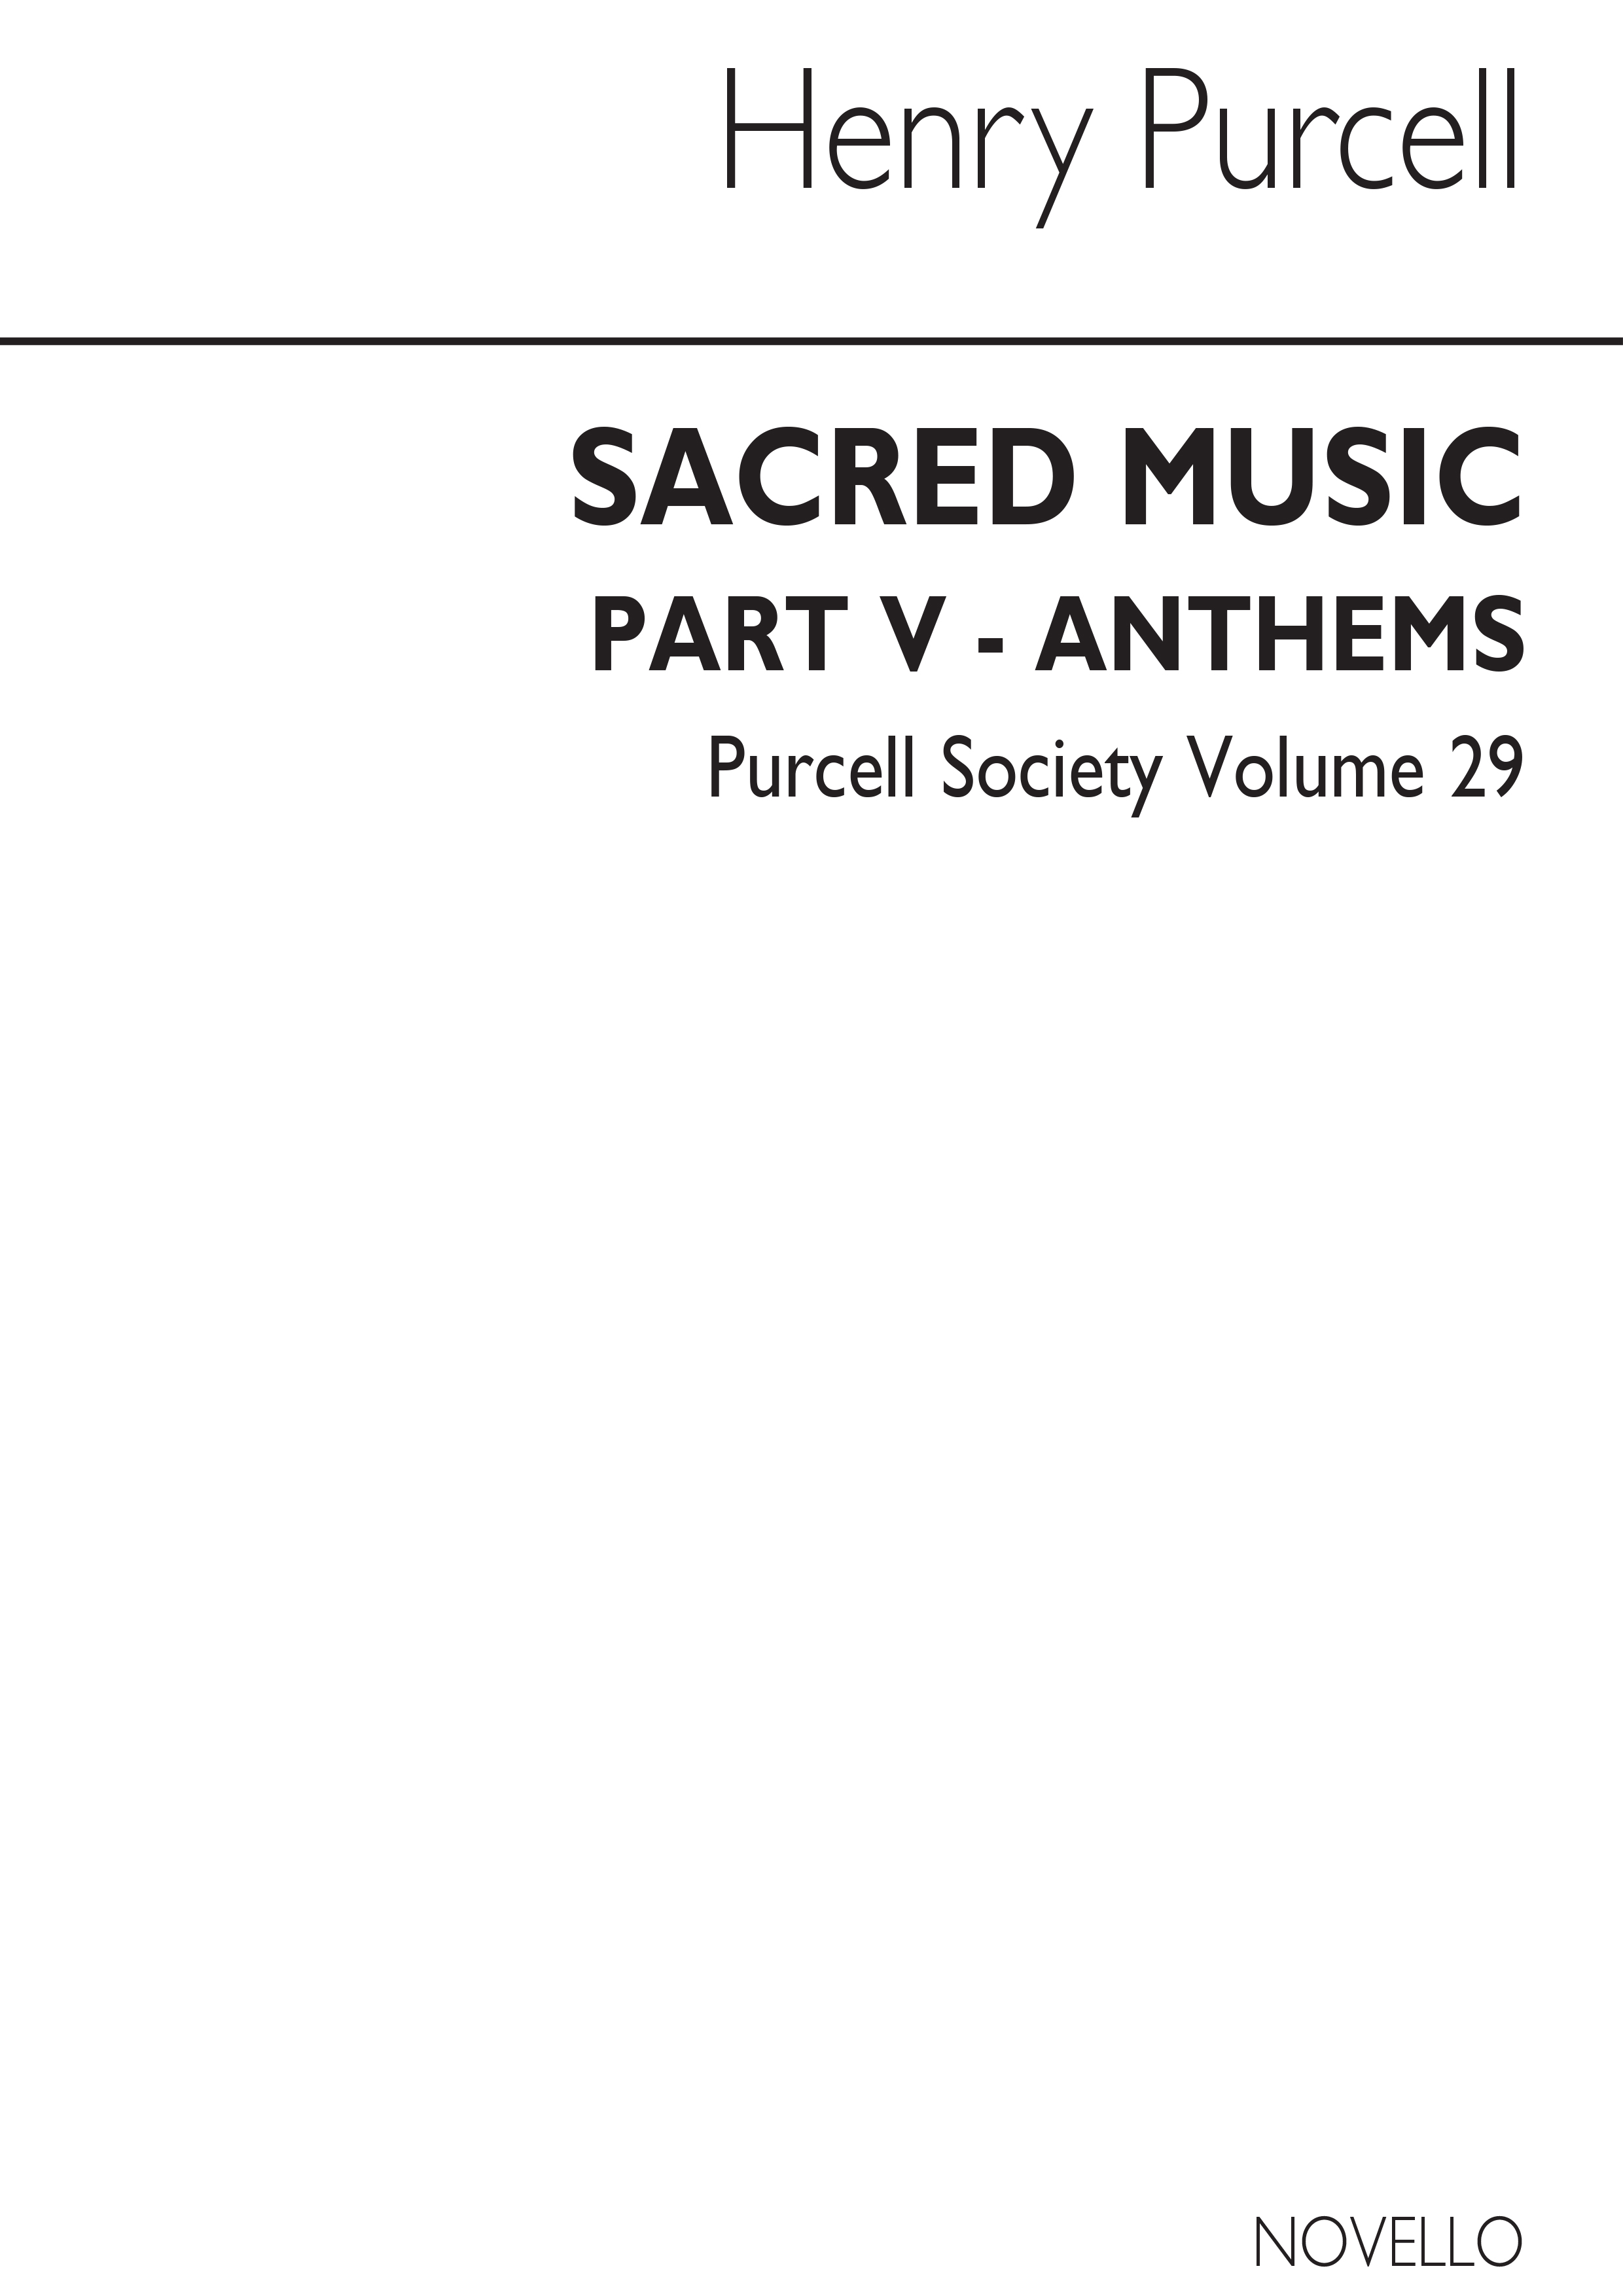 Purcell Society Volume 29 - Sacred Music Part 5 (Anthems) (Original Engraving)